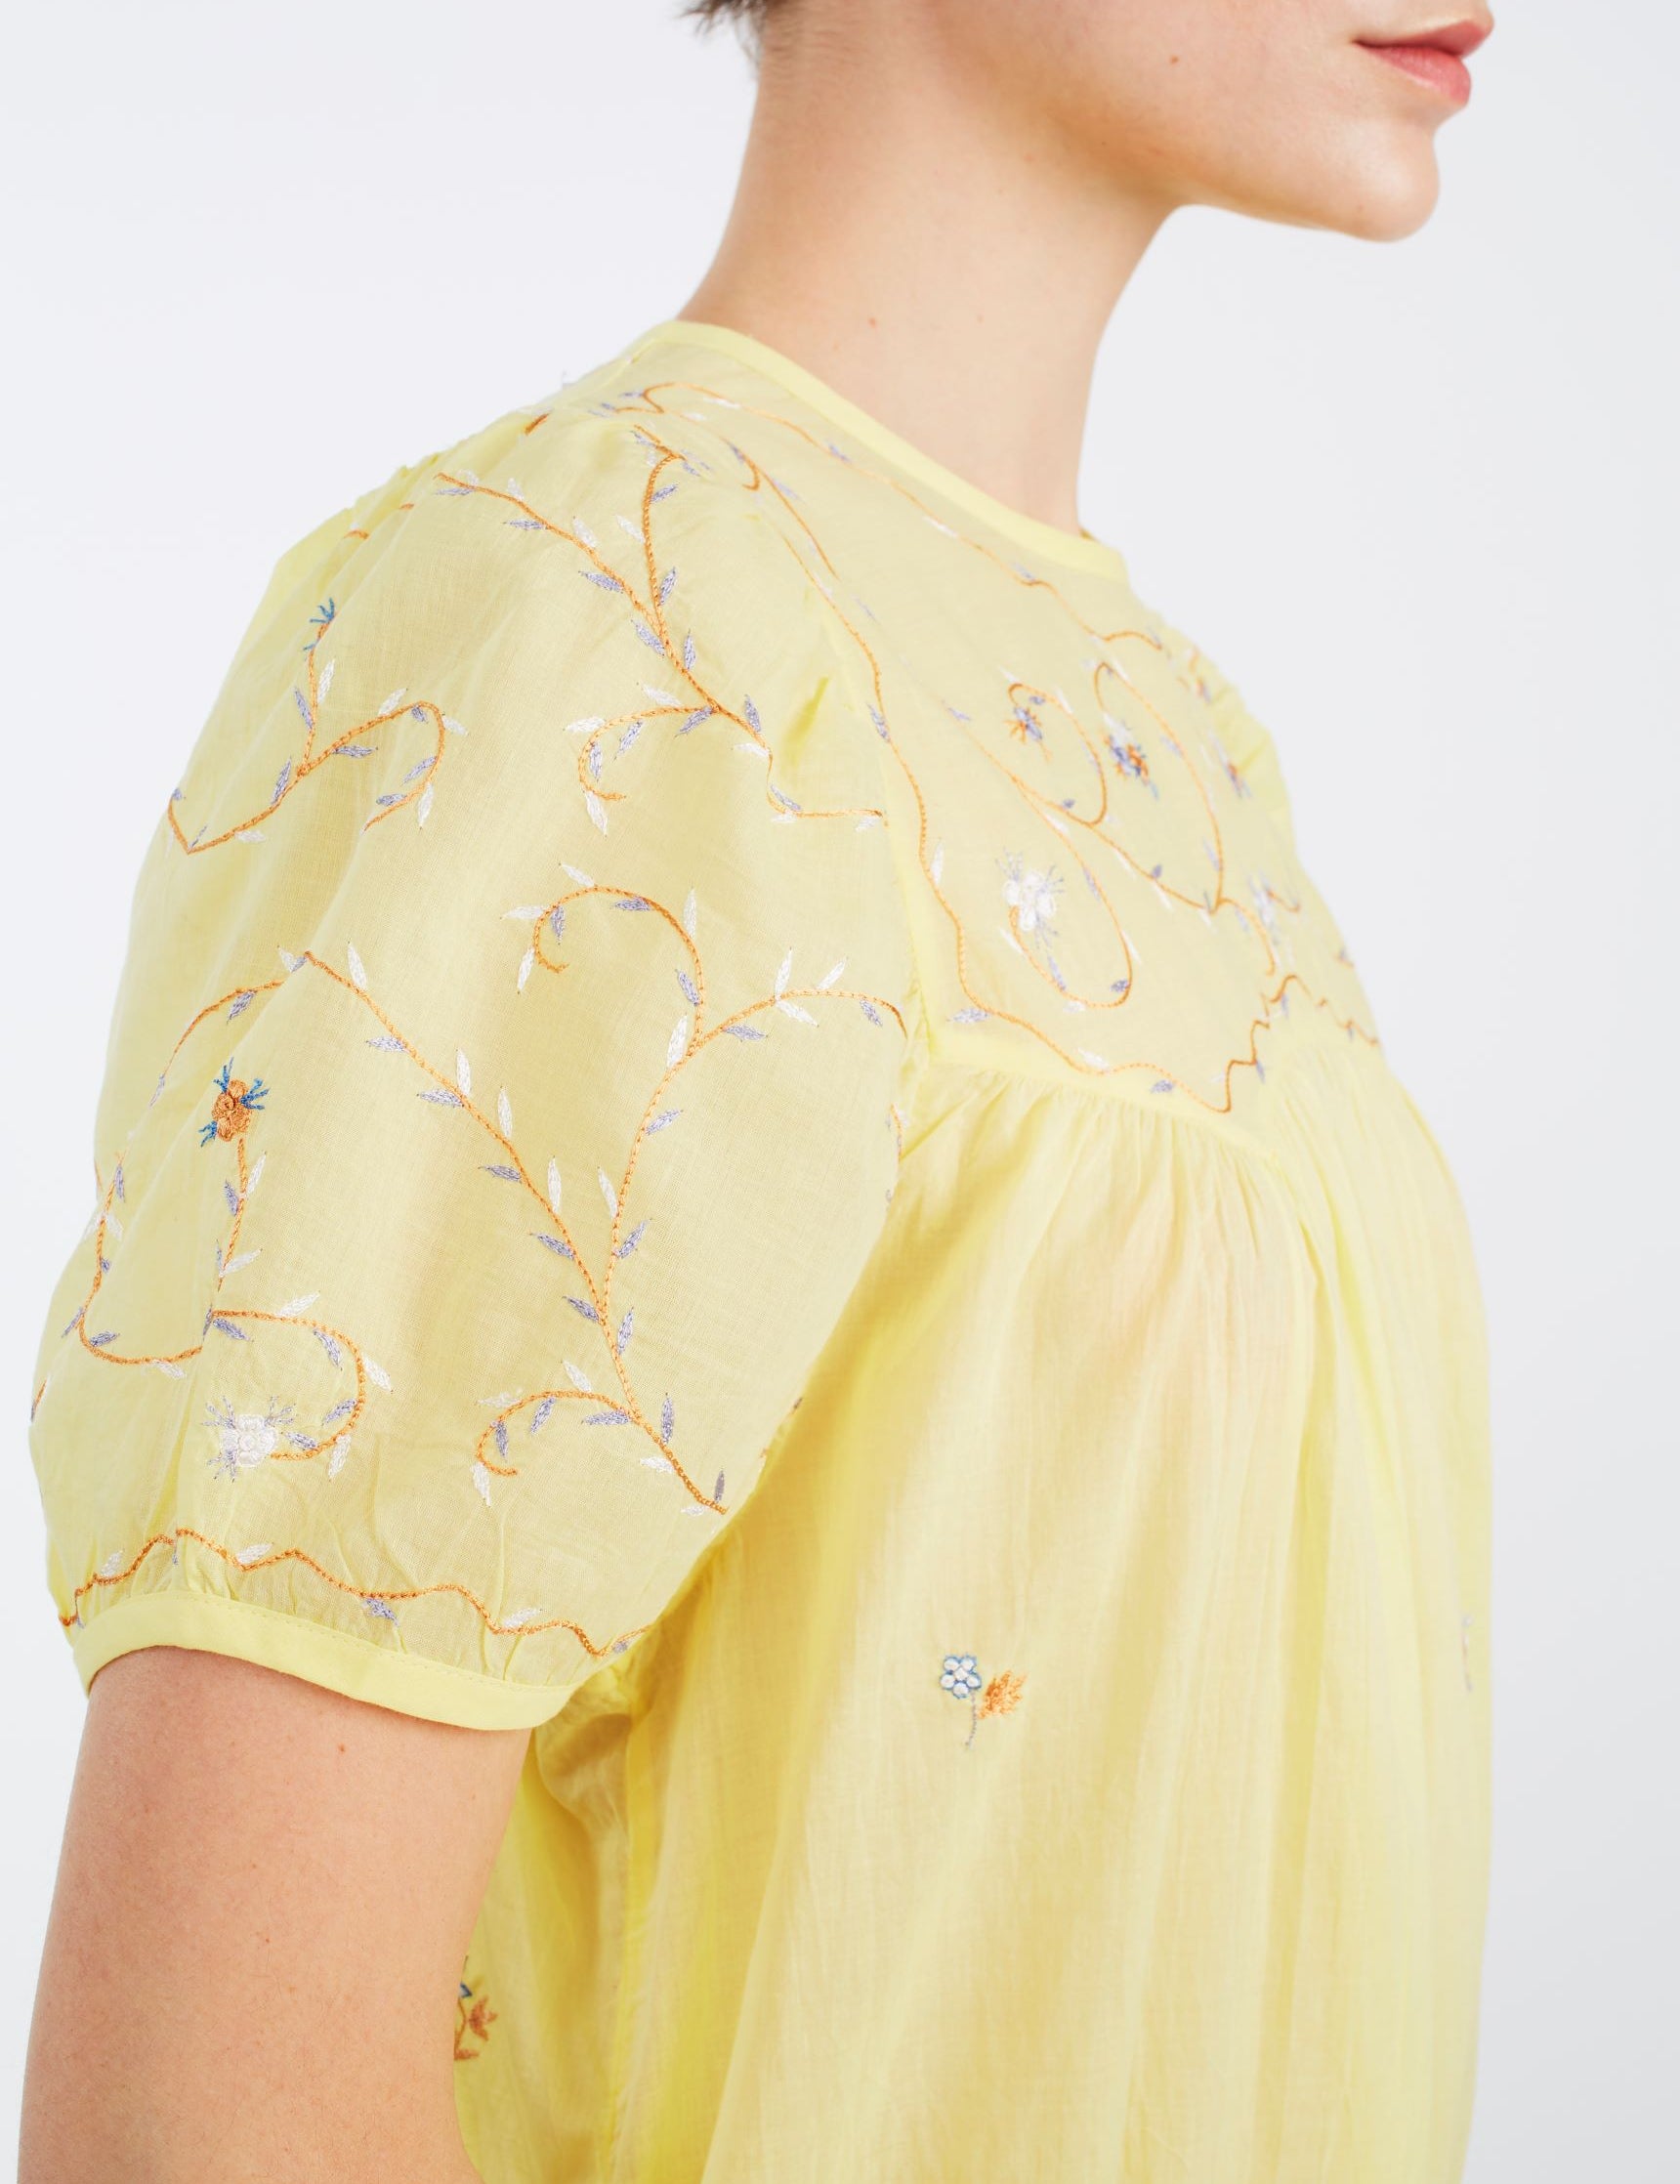 Detail of sleeve - Olympia Sweet Lemon cotton Dress by Thierry Colson